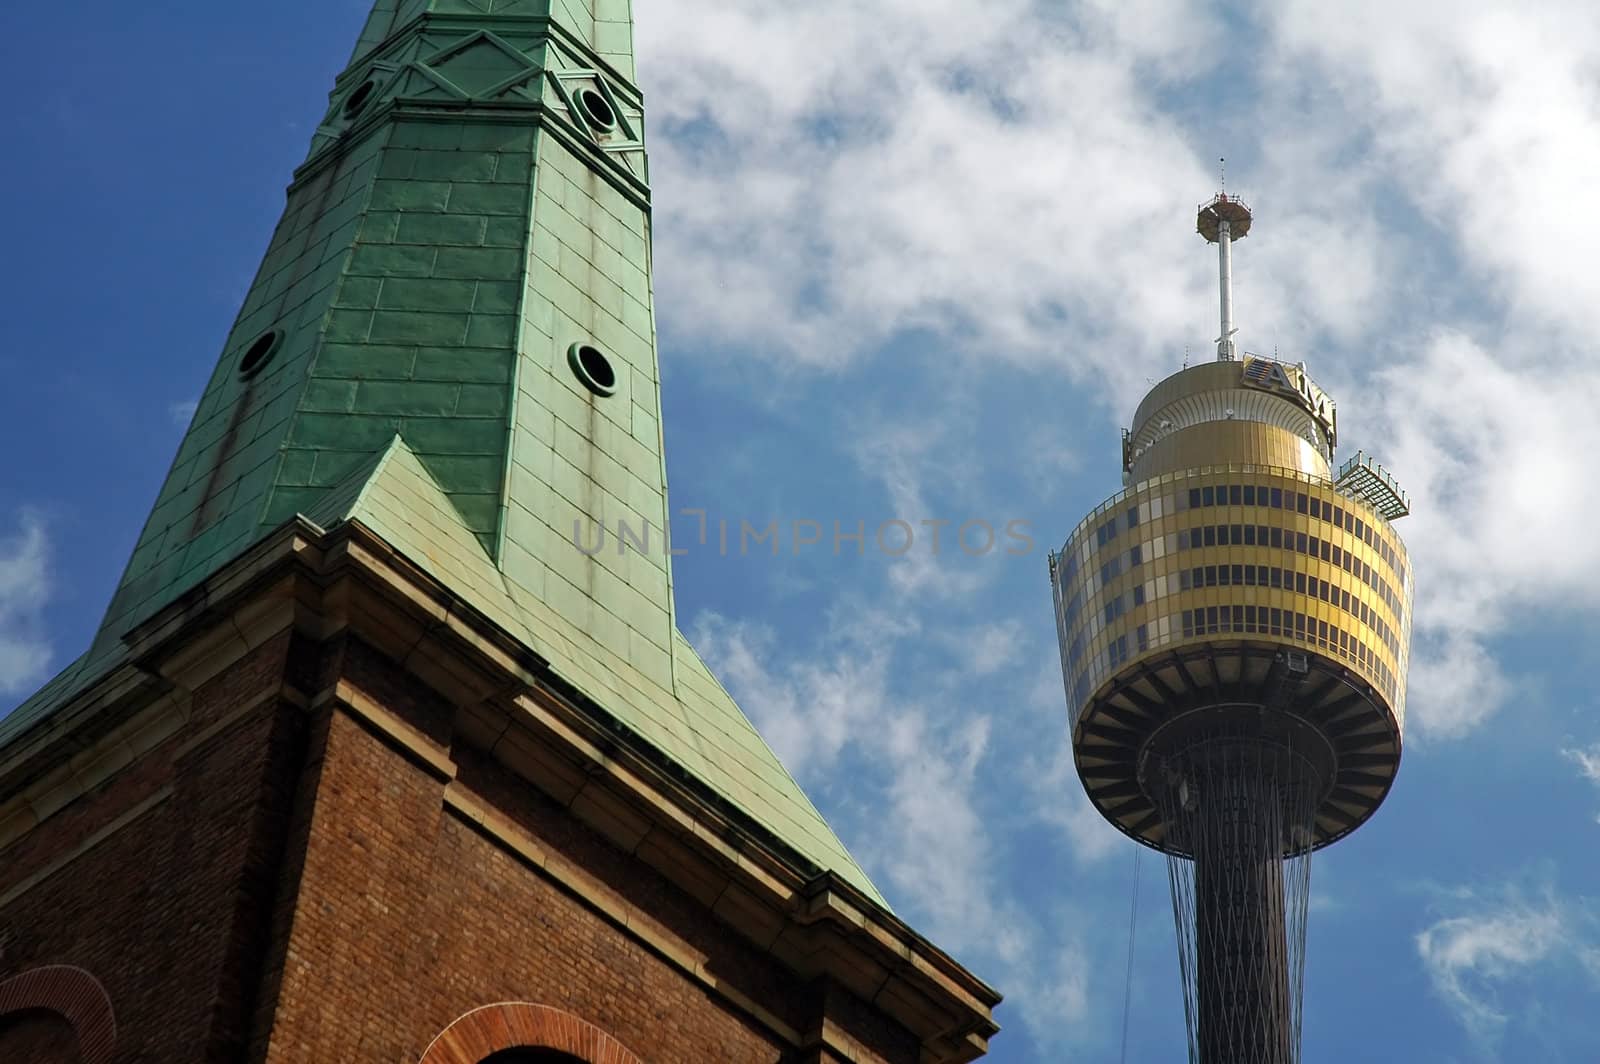 religion in sydney, church tower detail, sydney tower detail, blue sky with clouds